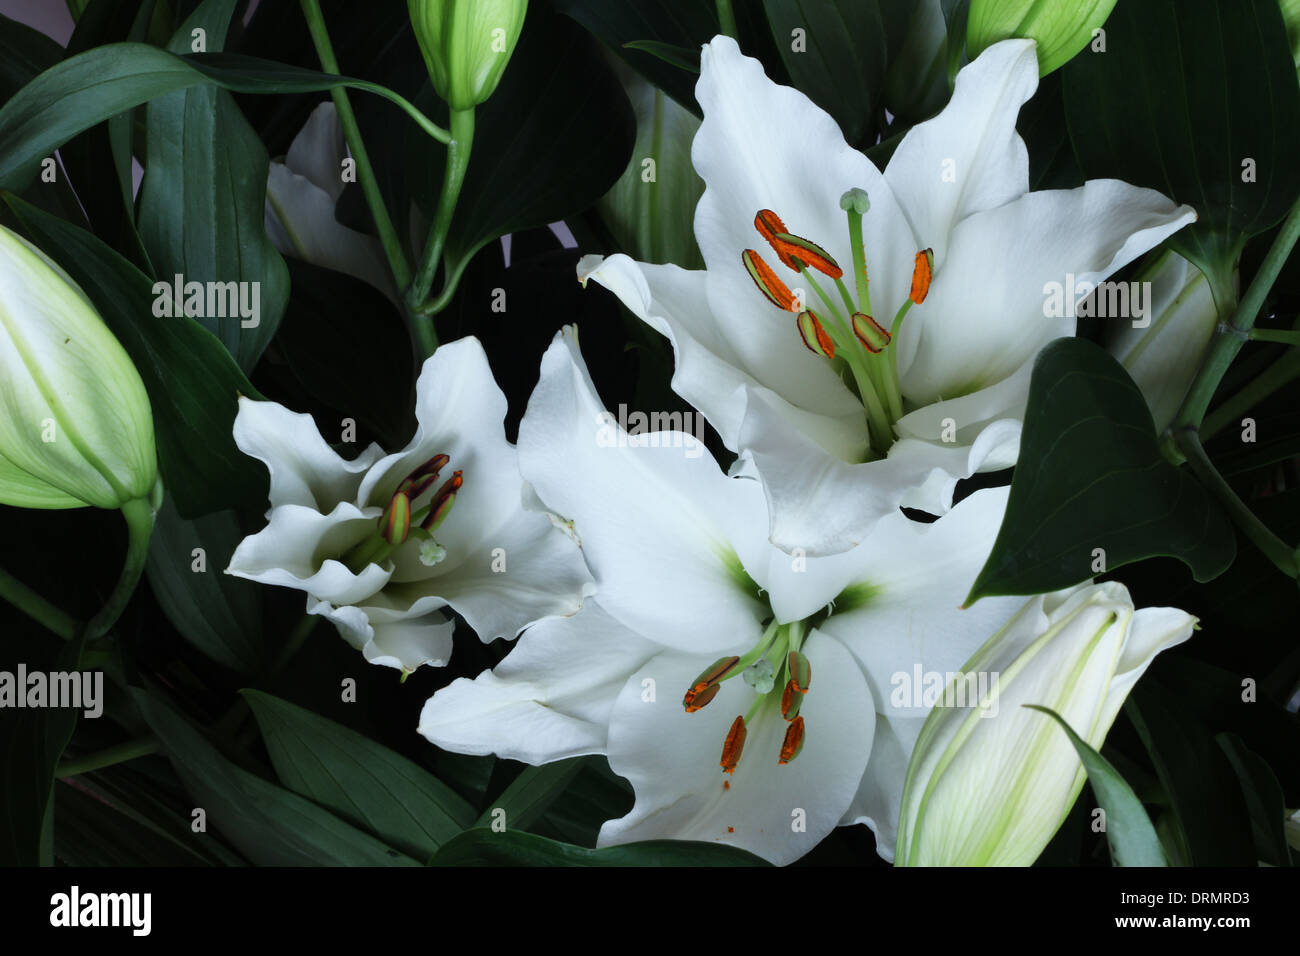 Lily bouquet Stock Photo